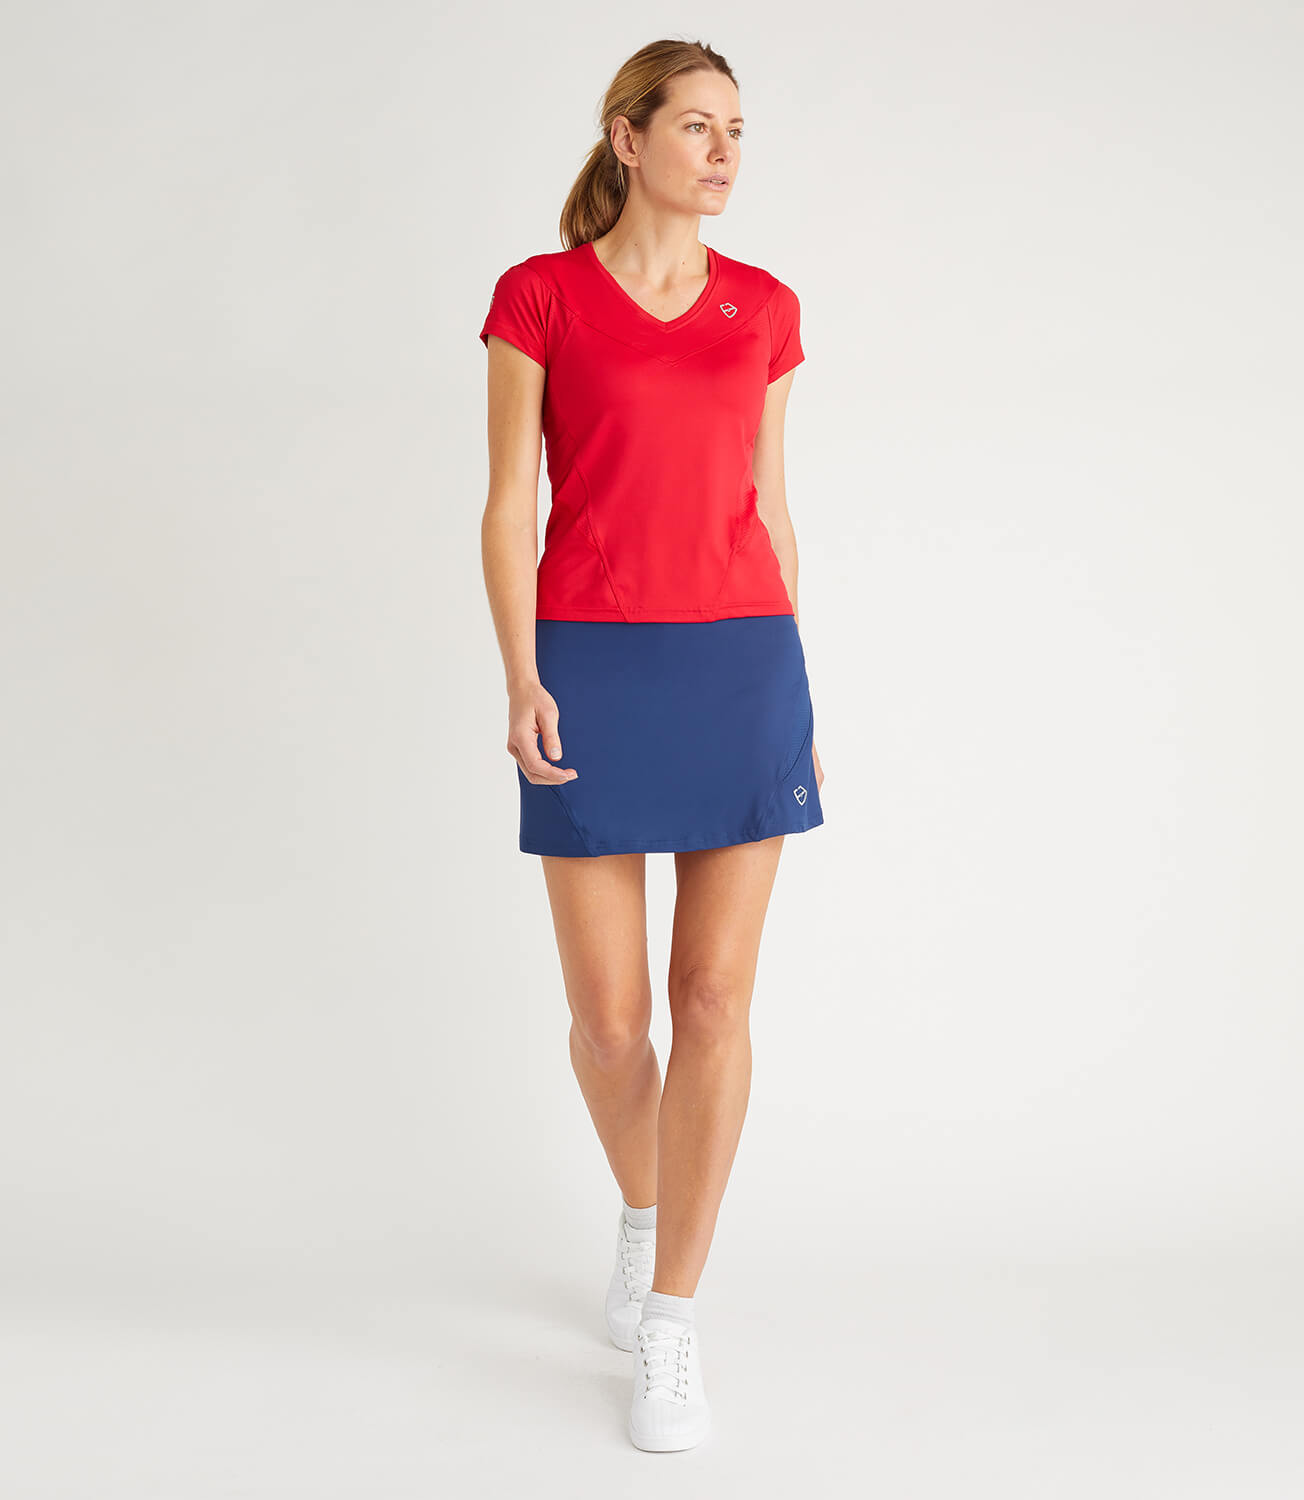 Nicole Technical V Neck Tee - Red